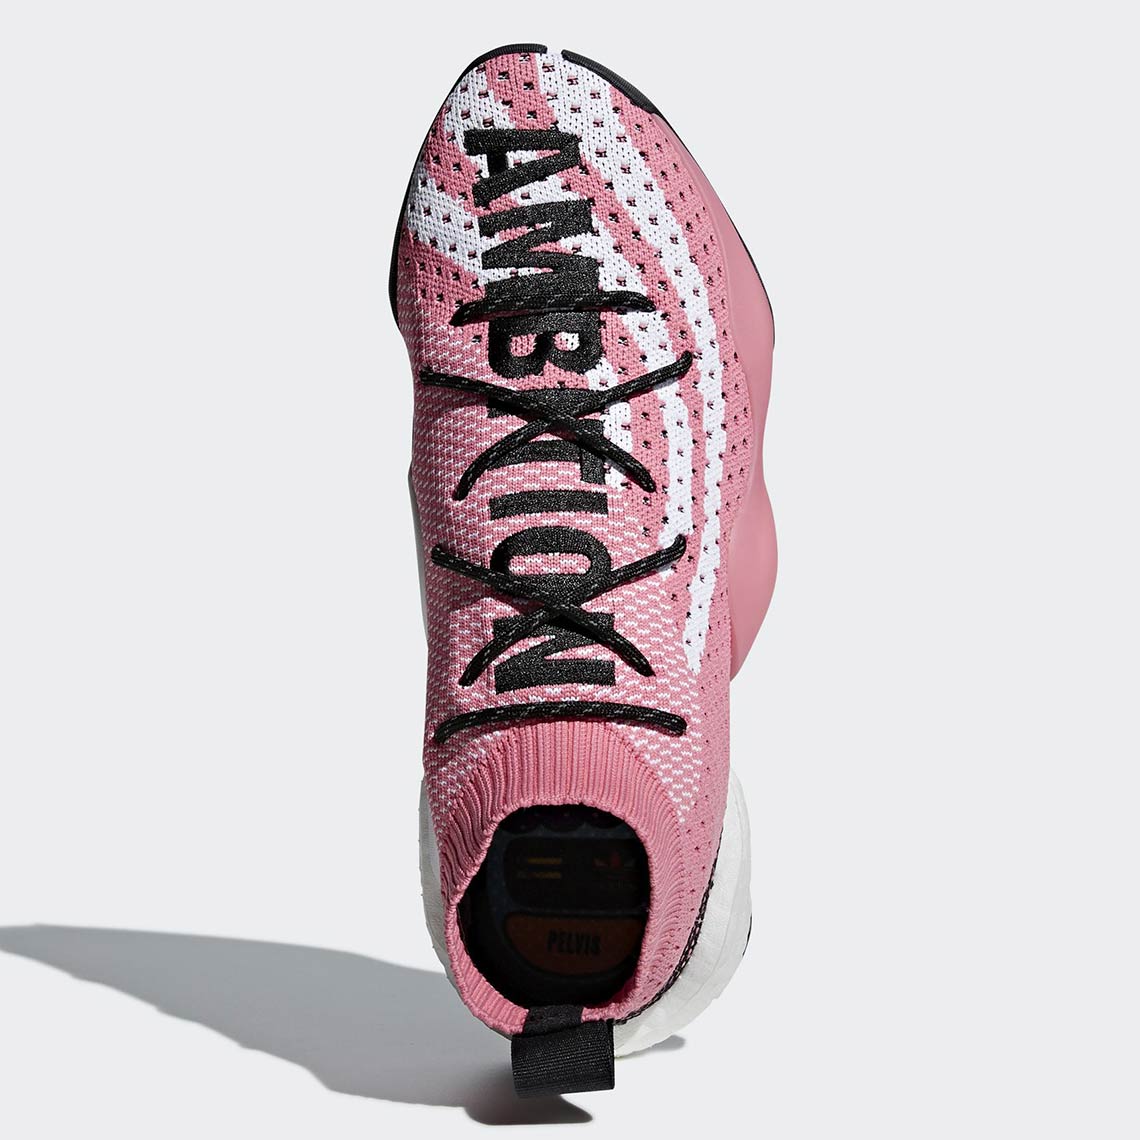 Pharrell x adidas Crazy BYW Ambition Pink Release Info